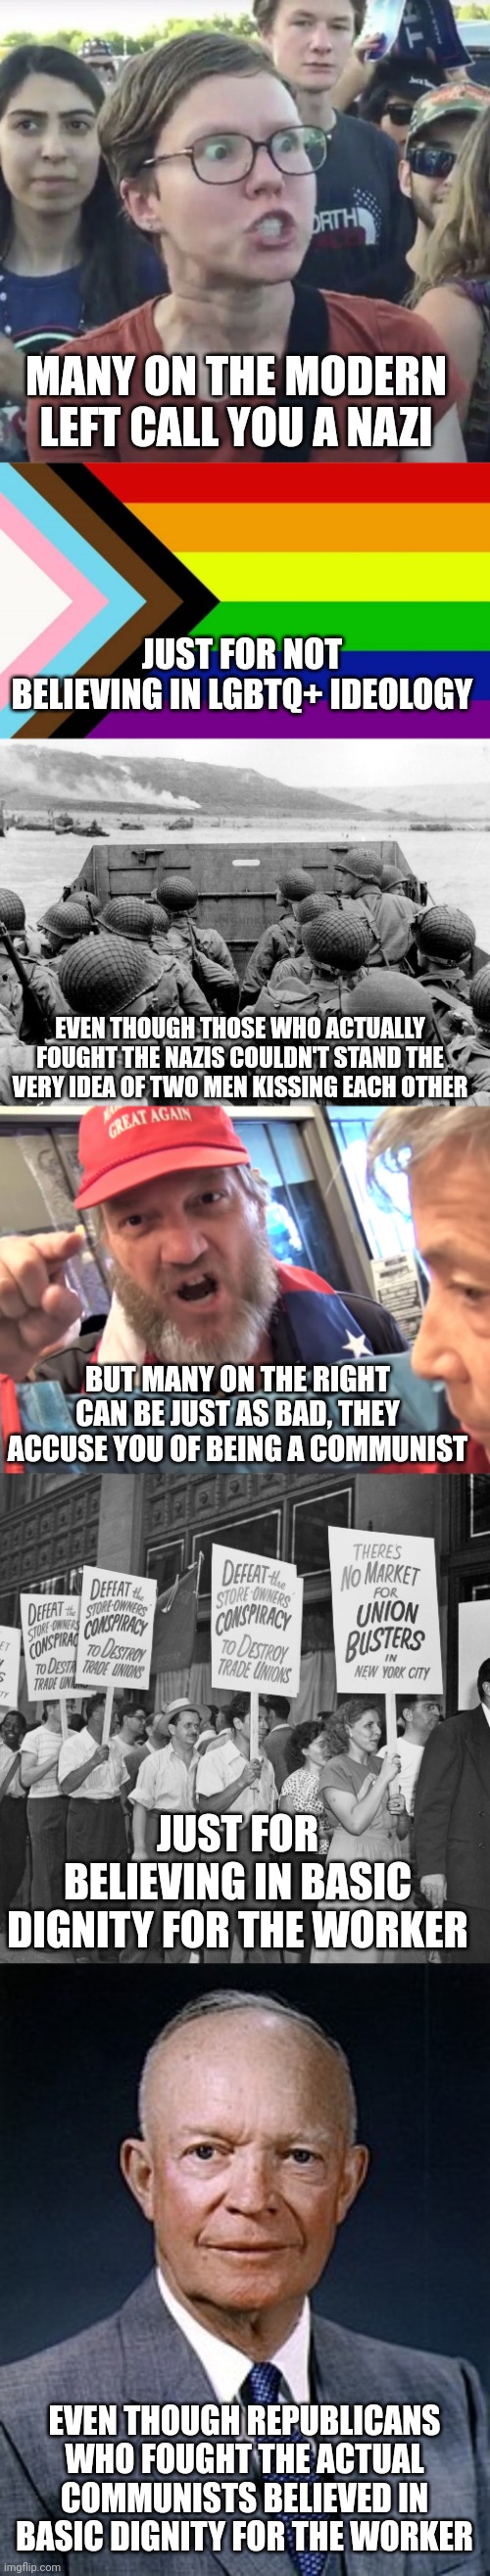 Trump supporters can be just as bad as leftist sjws who call you a nazi | MANY ON THE MODERN LEFT CALL YOU A NAZI; JUST FOR NOT BELIEVING IN LGBTQ+ IDEOLOGY; EVEN THOUGH THOSE WHO ACTUALLY FOUGHT THE NAZIS COULDN'T STAND THE VERY IDEA OF TWO MEN KISSING EACH OTHER; BUT MANY ON THE RIGHT CAN BE JUST AS BAD, THEY ACCUSE YOU OF BEING A COMMUNIST; JUST FOR BELIEVING IN BASIC DIGNITY FOR THE WORKER; EVEN THOUGH REPUBLICANS WHO FOUGHT THE ACTUAL COMMUNISTS BELIEVED IN BASIC DIGNITY FOR THE WORKER | image tagged in liberal logic,republicans,trump supporters,dwight d eisenhower,conservative logic,triggered | made w/ Imgflip meme maker